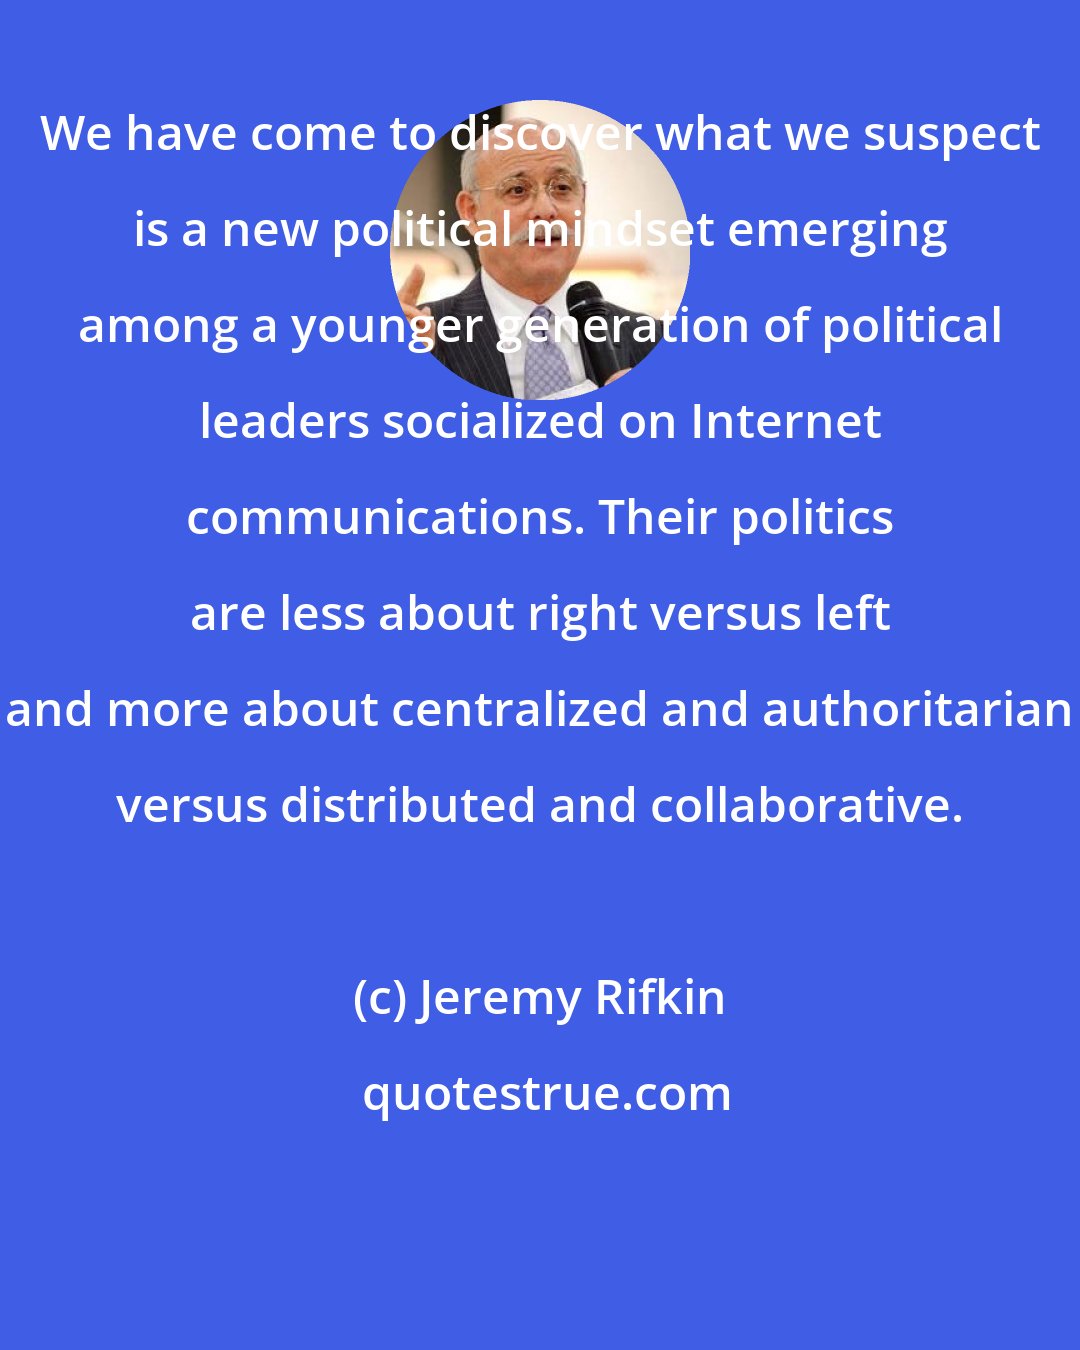 Jeremy Rifkin: We have come to discover what we suspect is a new political mindset emerging among a younger generation of political leaders socialized on Internet communications. Their politics are less about right versus left and more about centralized and authoritarian versus distributed and collaborative.